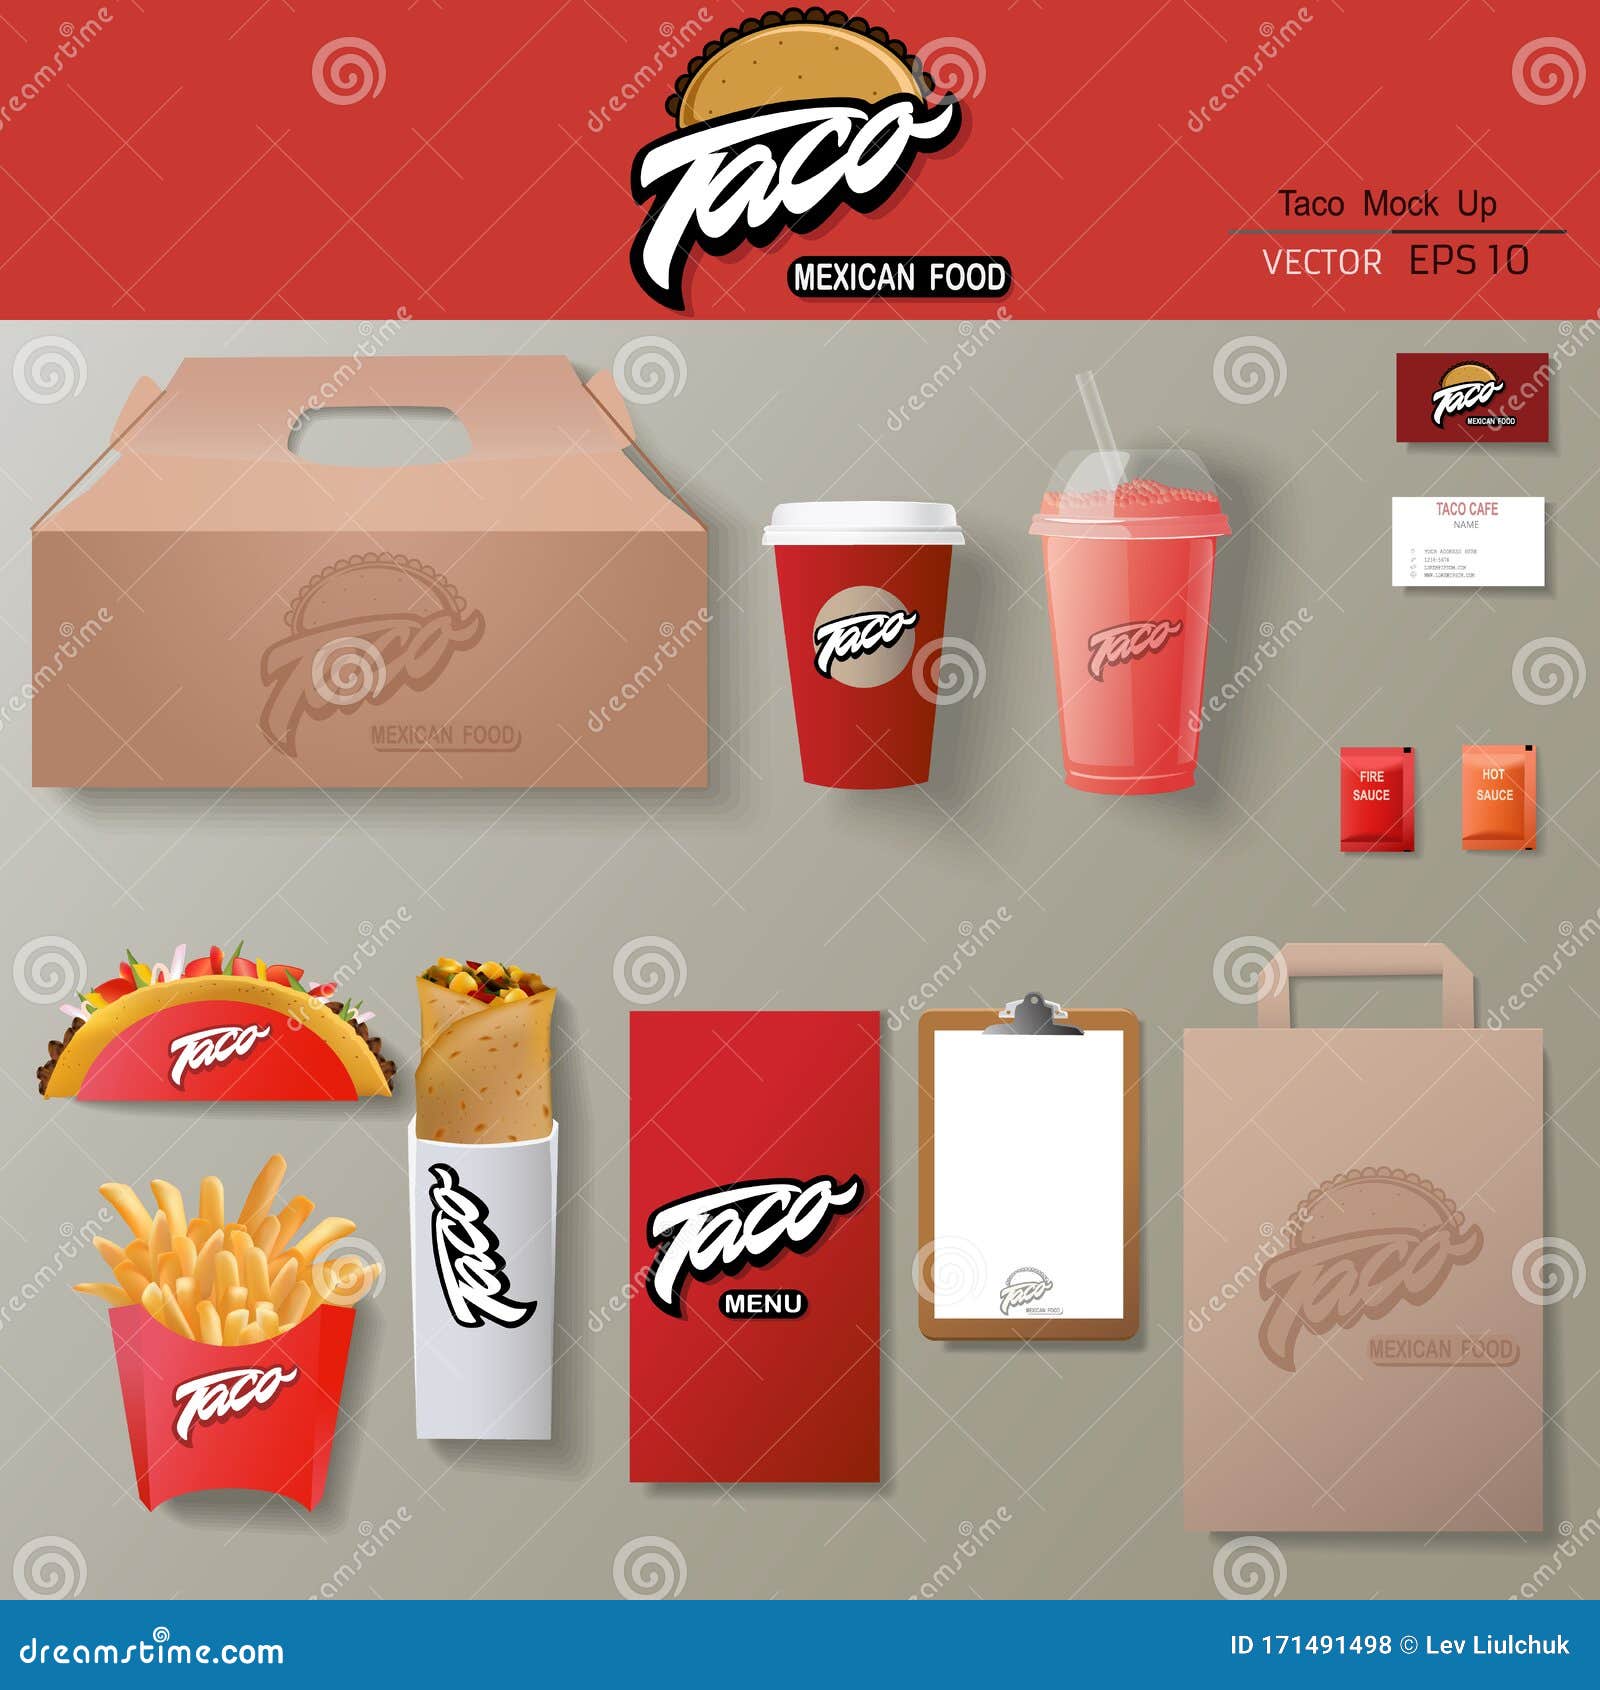 Download Vector Tacos Corporate Identity Template Design Set Stock Vector Illustration Of Lunch Mockup 171491498